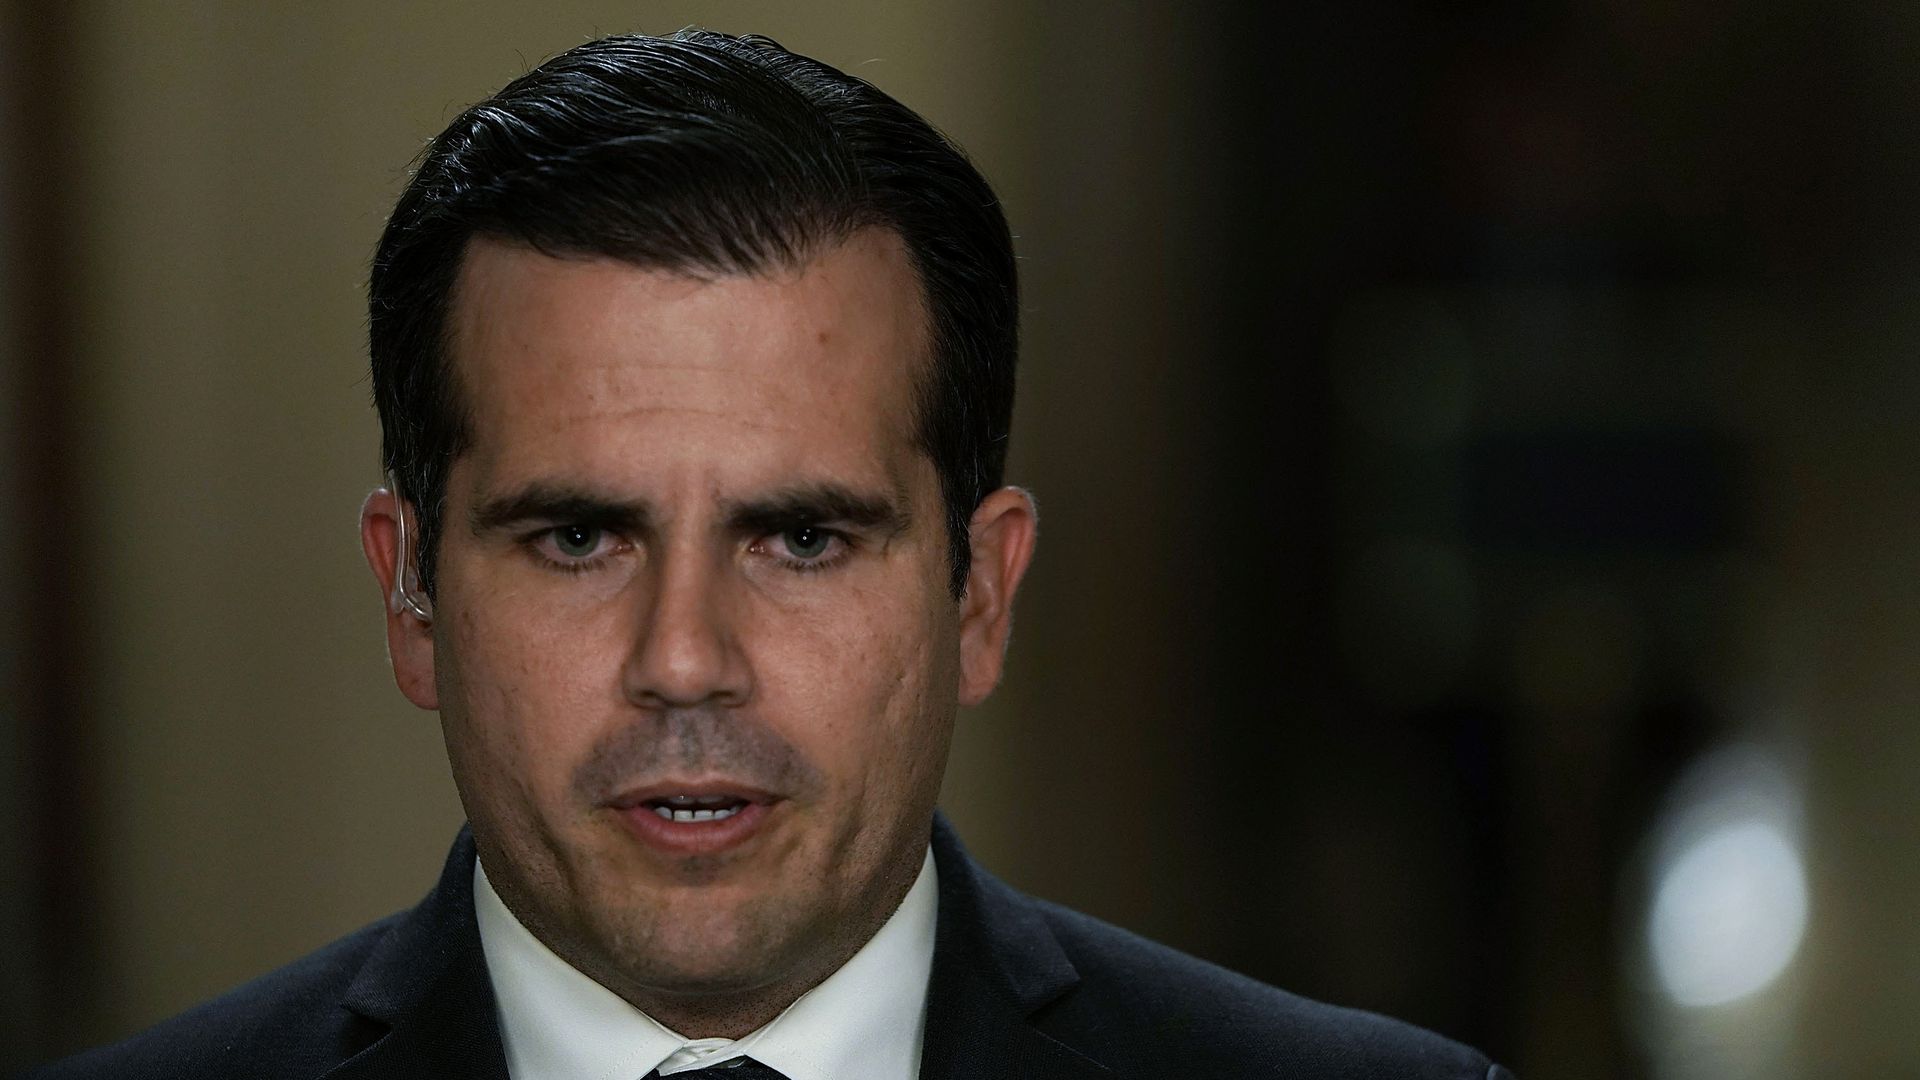 Puerto Rican Gov. Ricardo Rossello after a House vote at the Capitol December 21, 2017 in Washington, DC. 